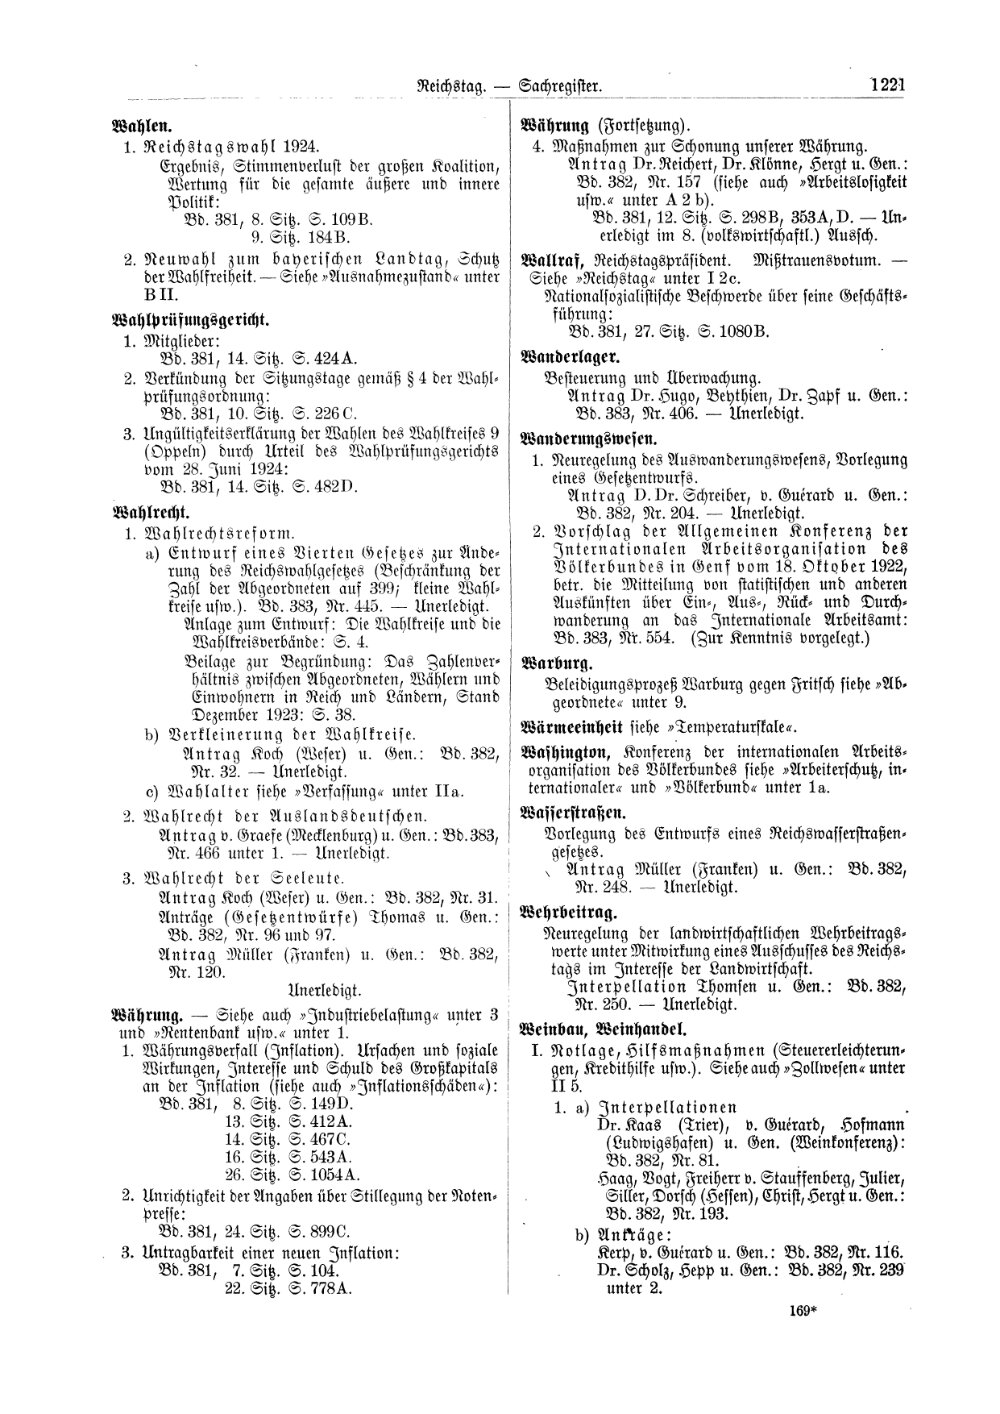 Scan of page 1221